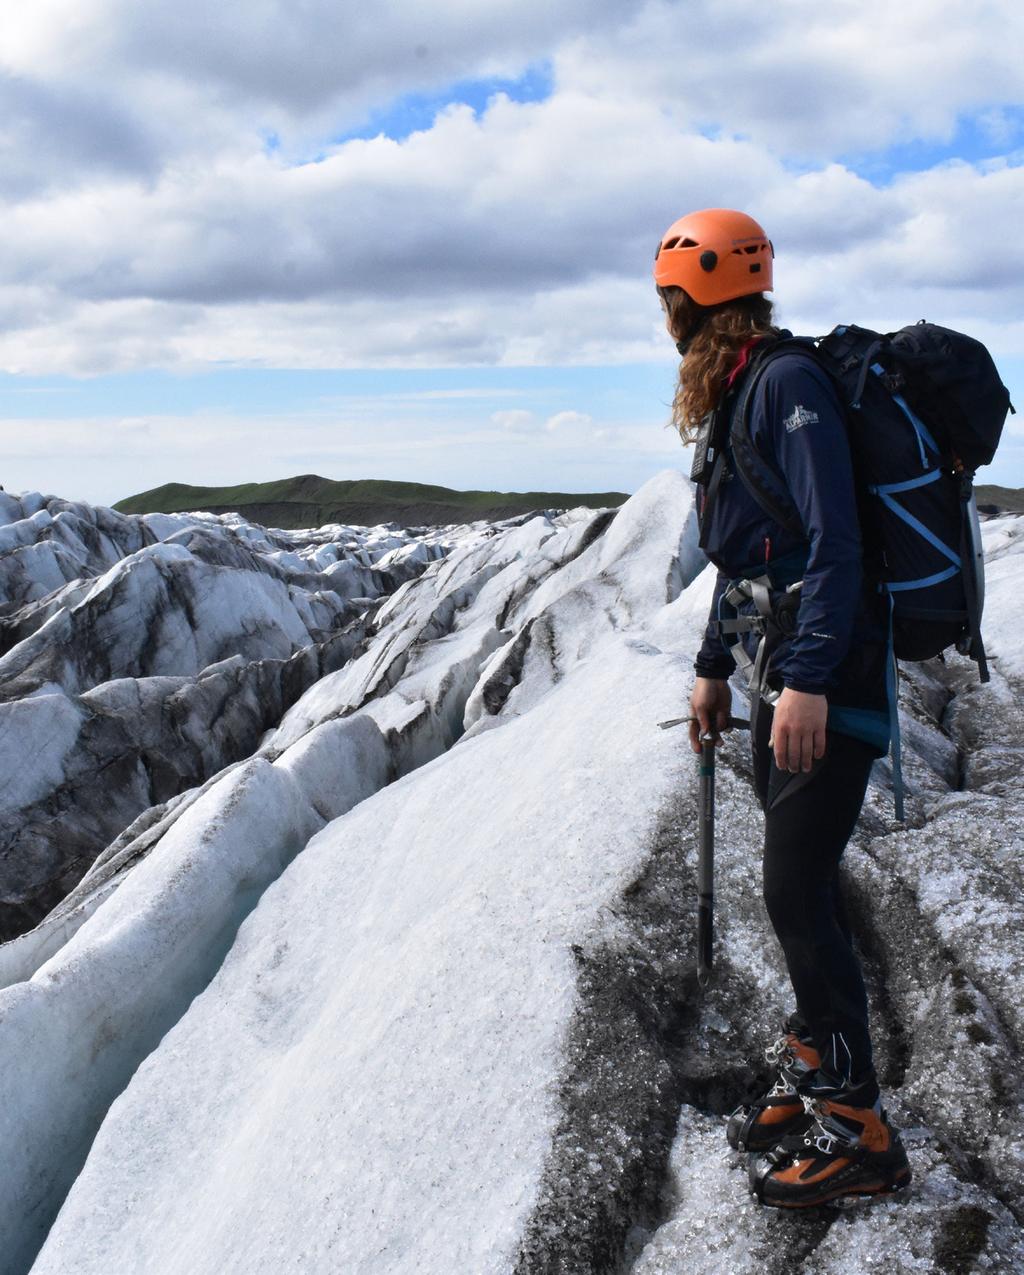 G L AC I ER A DV EN TURES SK A FTAF ELL 3 HO UR GL ACI ER HIKE Unforgettable Glacier Hike on Europe s Largest Glacier: Vatnajökull Experience the wild with this breathtaking hike to the heights of an